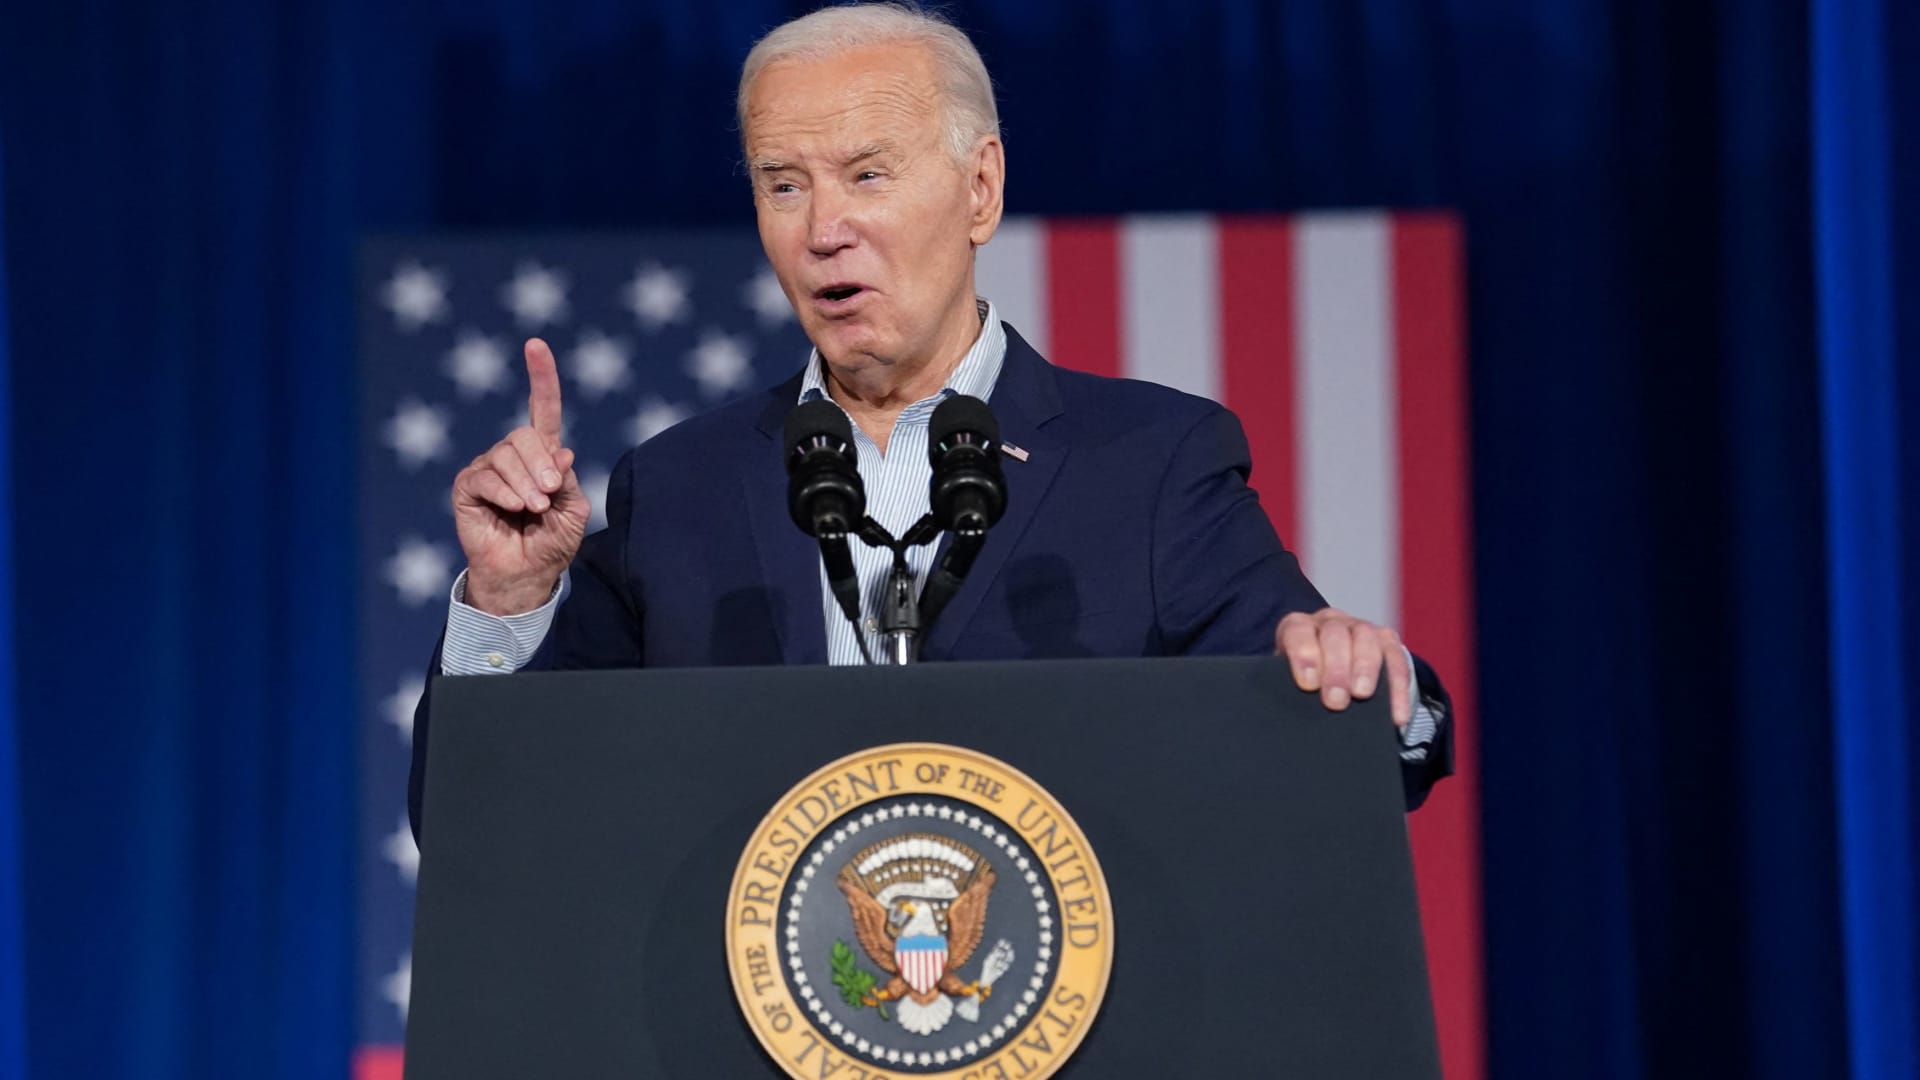 Biden attributes economic struggles in China, Japan, and India to ‘xenophobia’